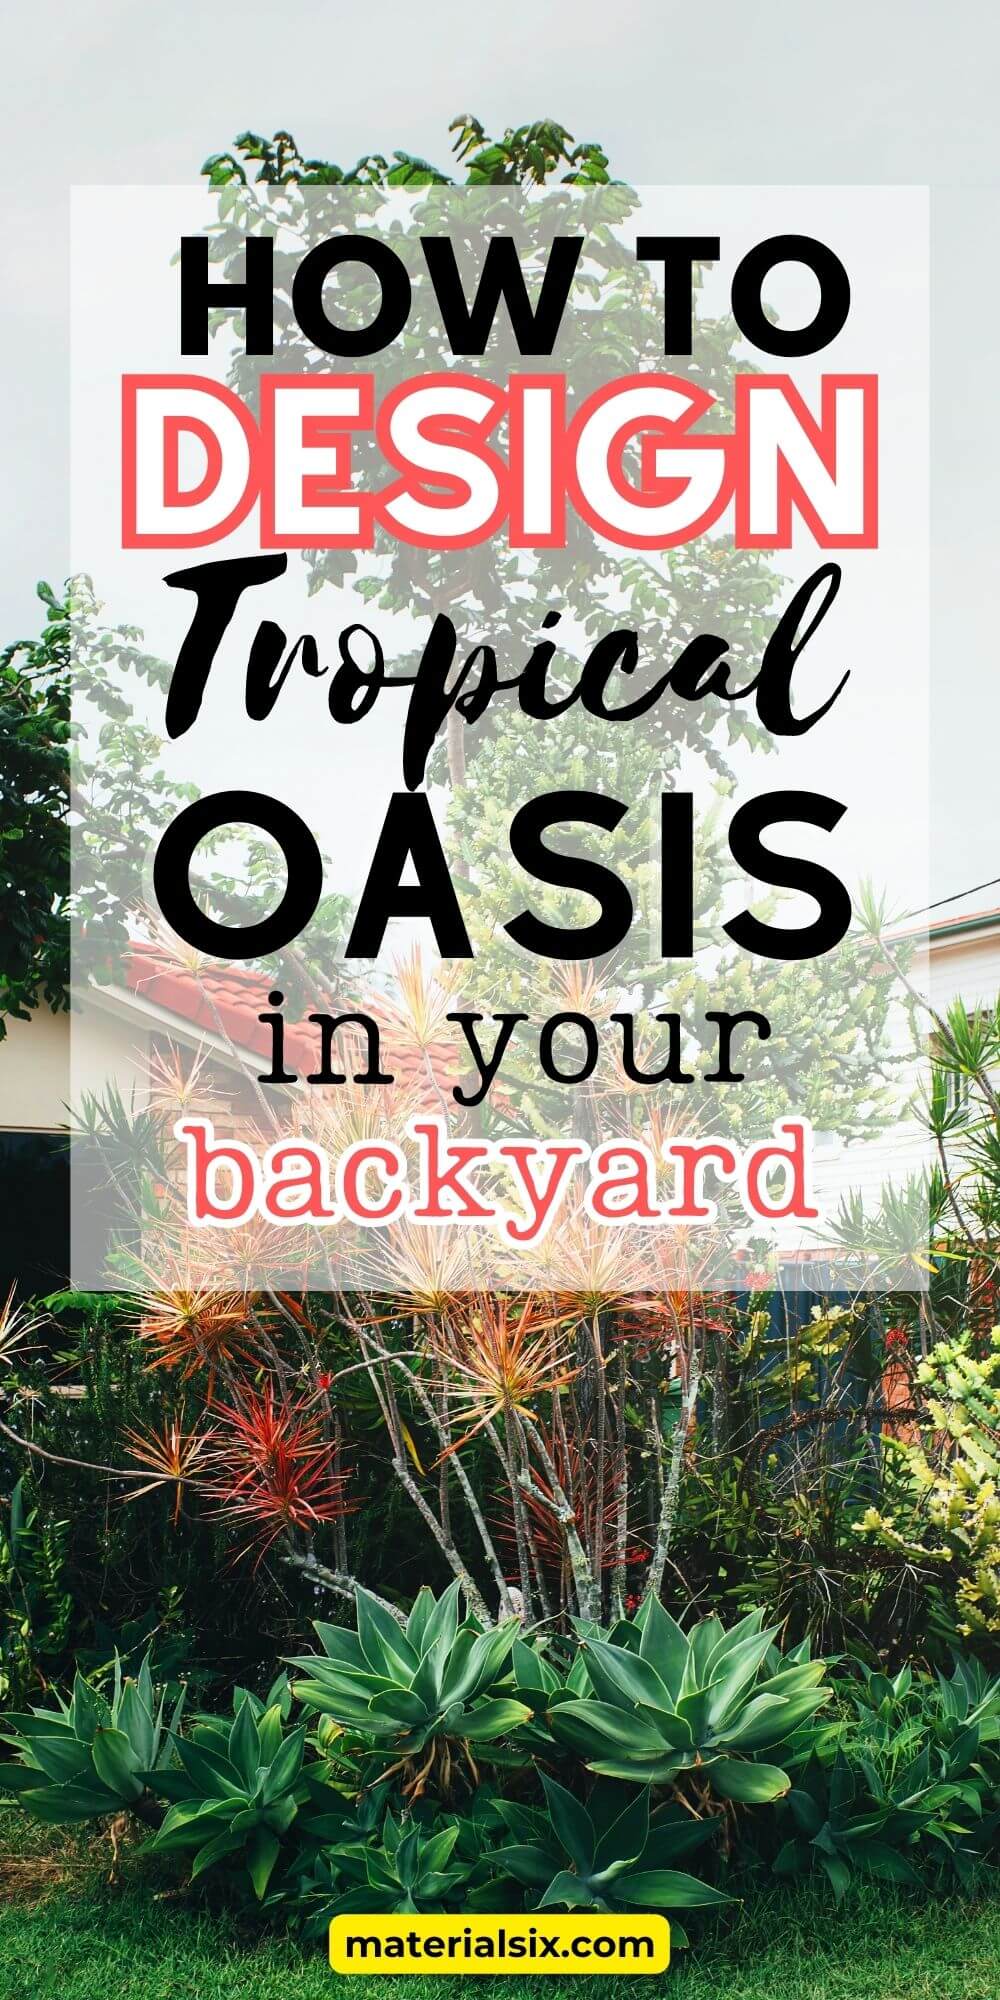 How to Design a Tropical Oasis in Your Own Backyard (1) (1)